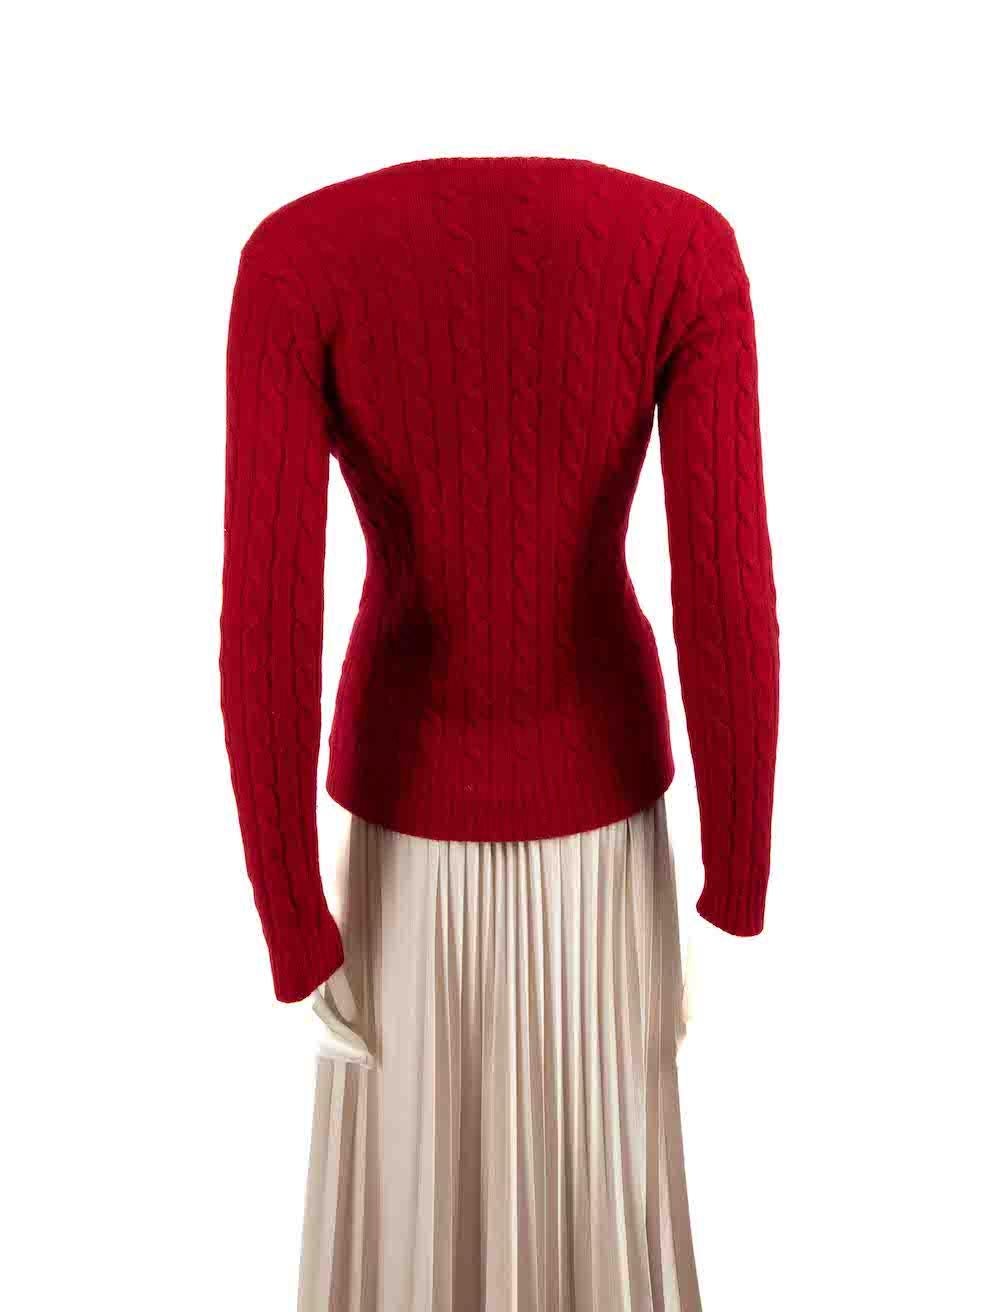 Ralph Lauren Red Cashmere Cable Knit Jumper Size S In Excellent Condition For Sale In London, GB